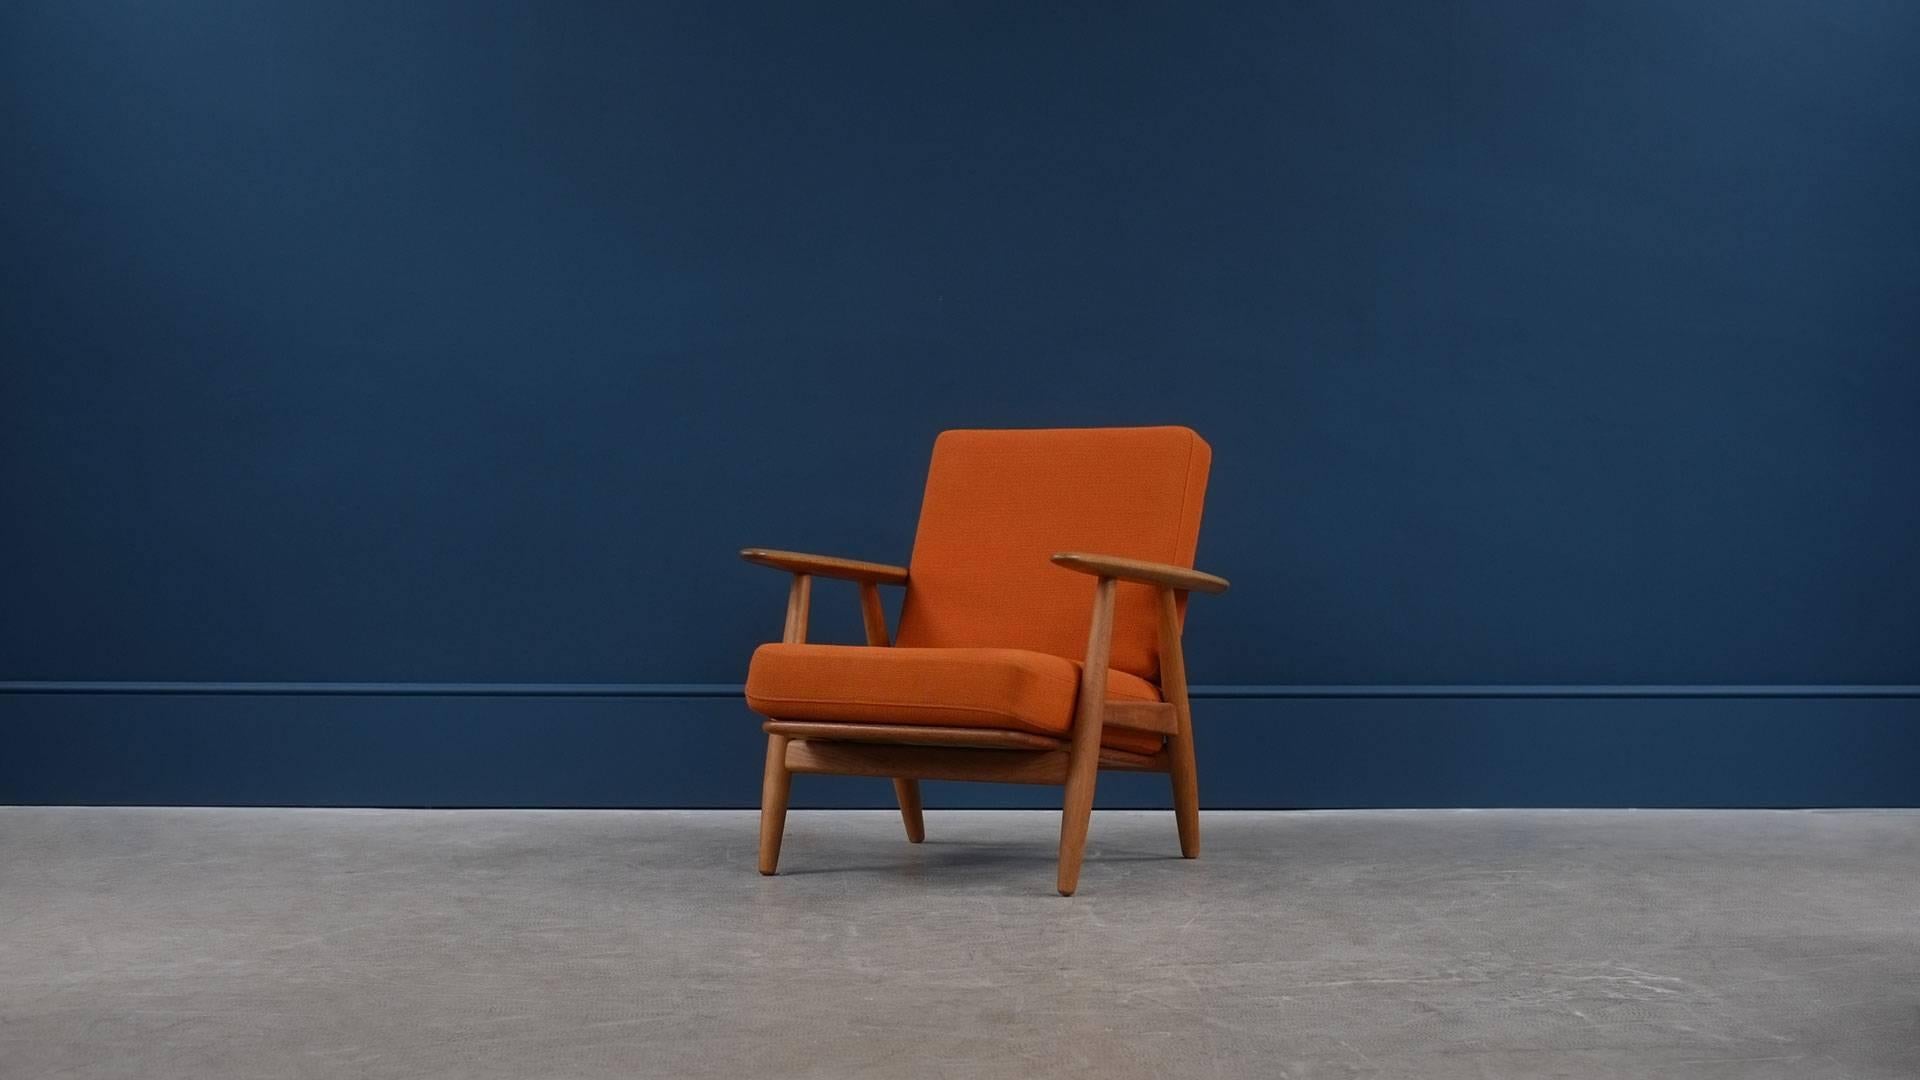 Wonderful GE240 cigar chair by Hans Wegner for GETAMA, Denmark. Very figured solid oak frame with original sprung cushions and orange fabric. New upholstery options available.